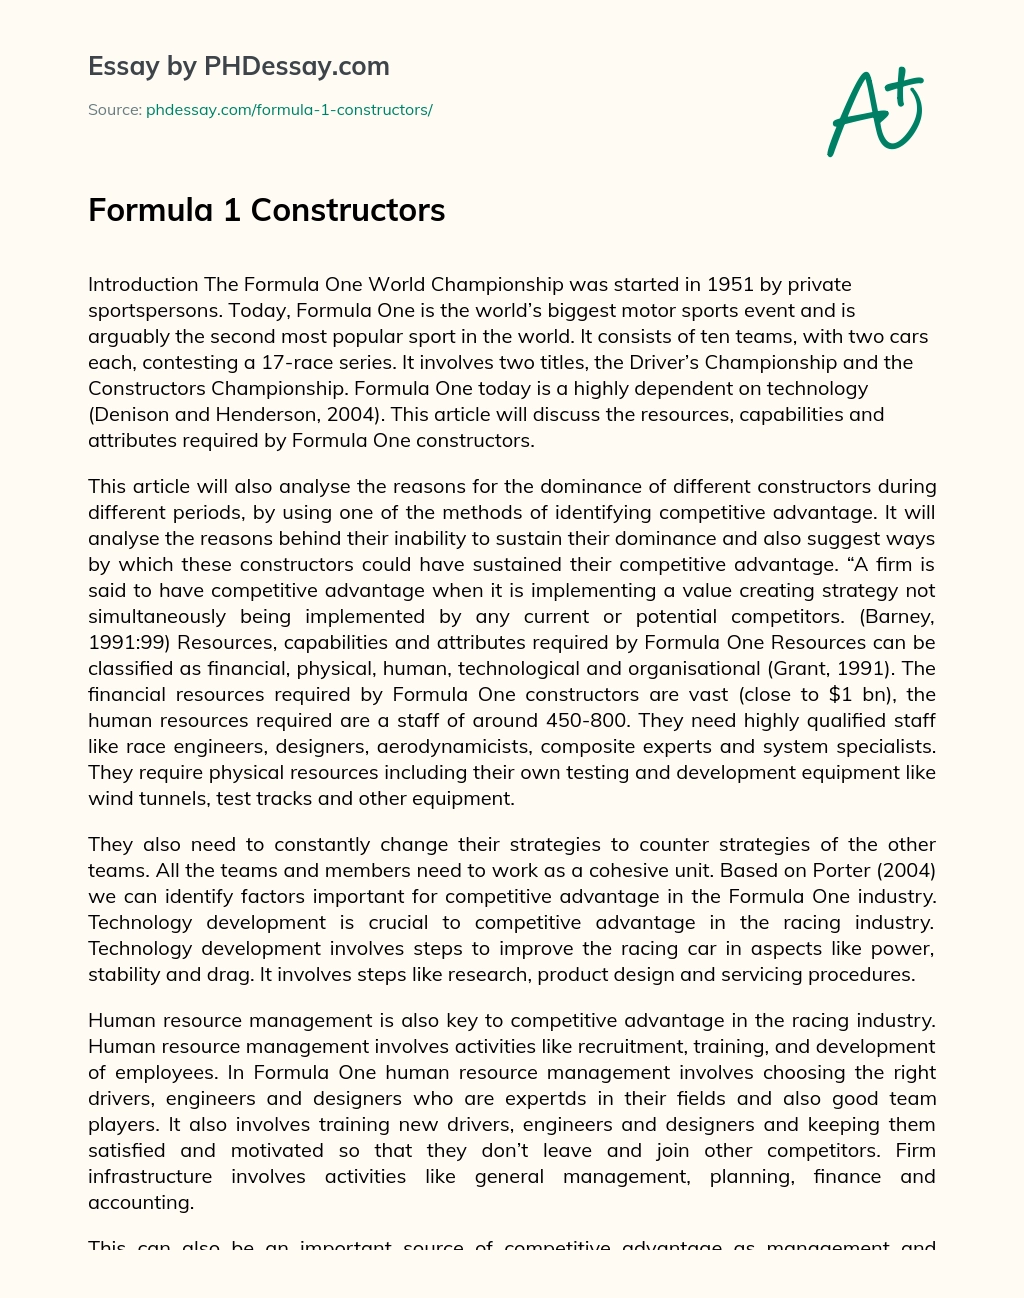 Analyzing Competitive Advantage in Formula One: Resources and Capabilities Required essay